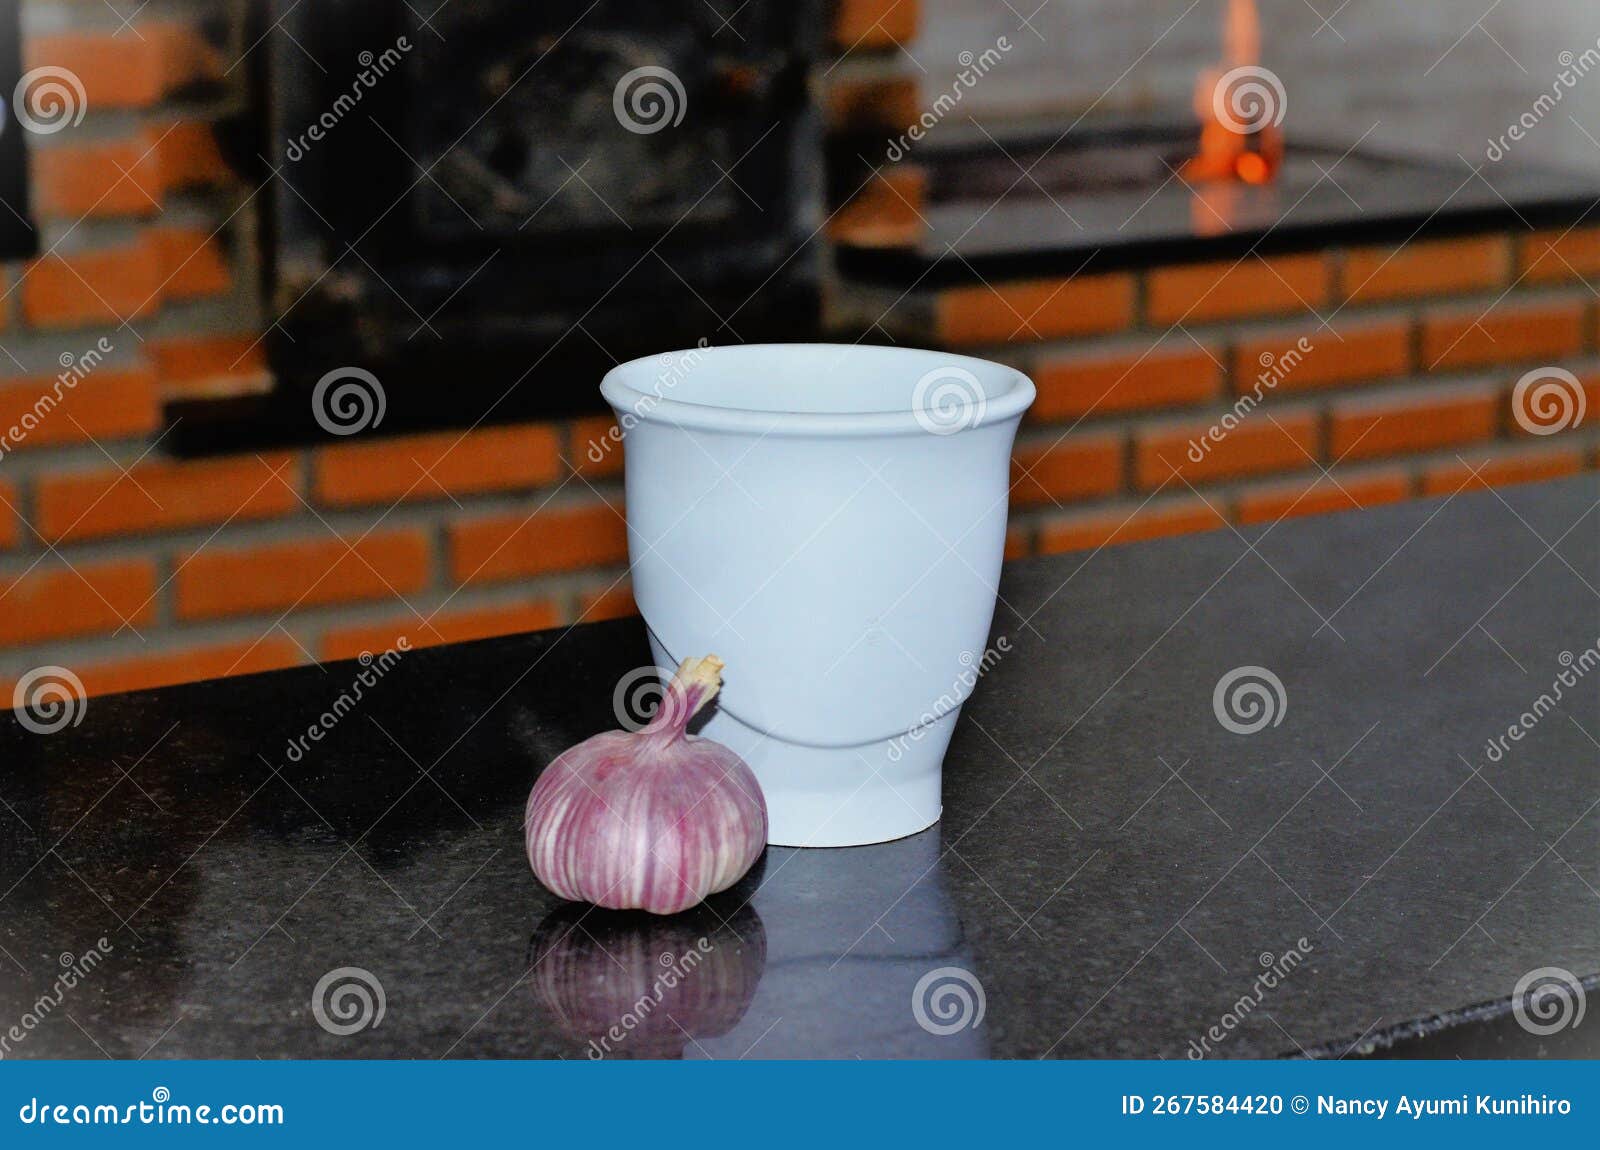 pestle and garlic cup on table